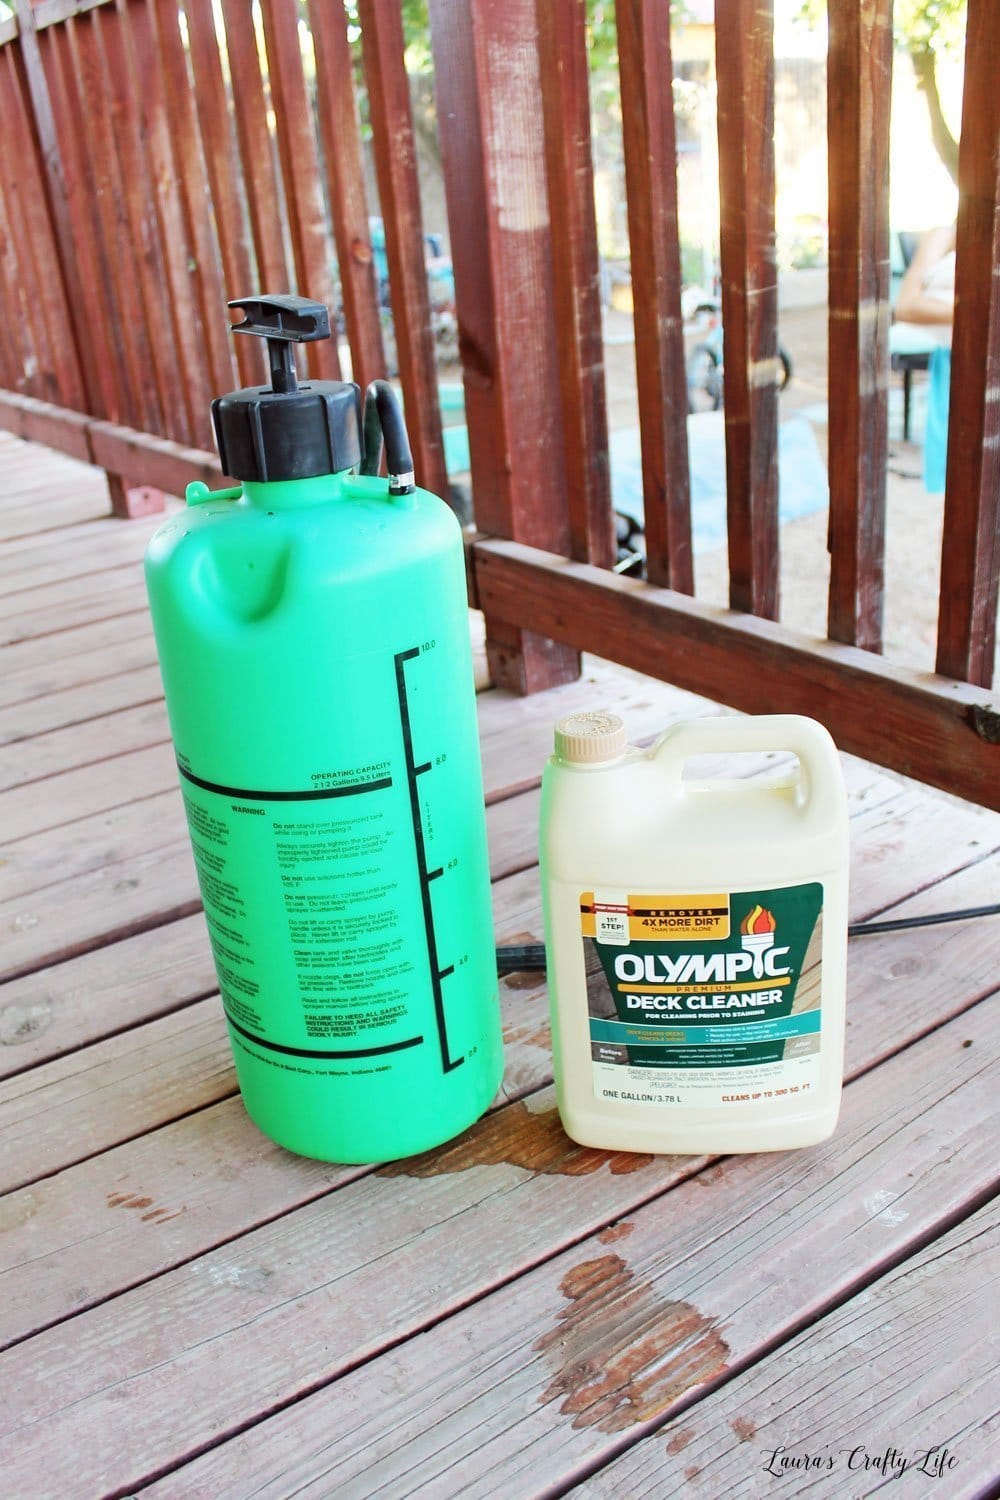 Supplies needed to clean deck